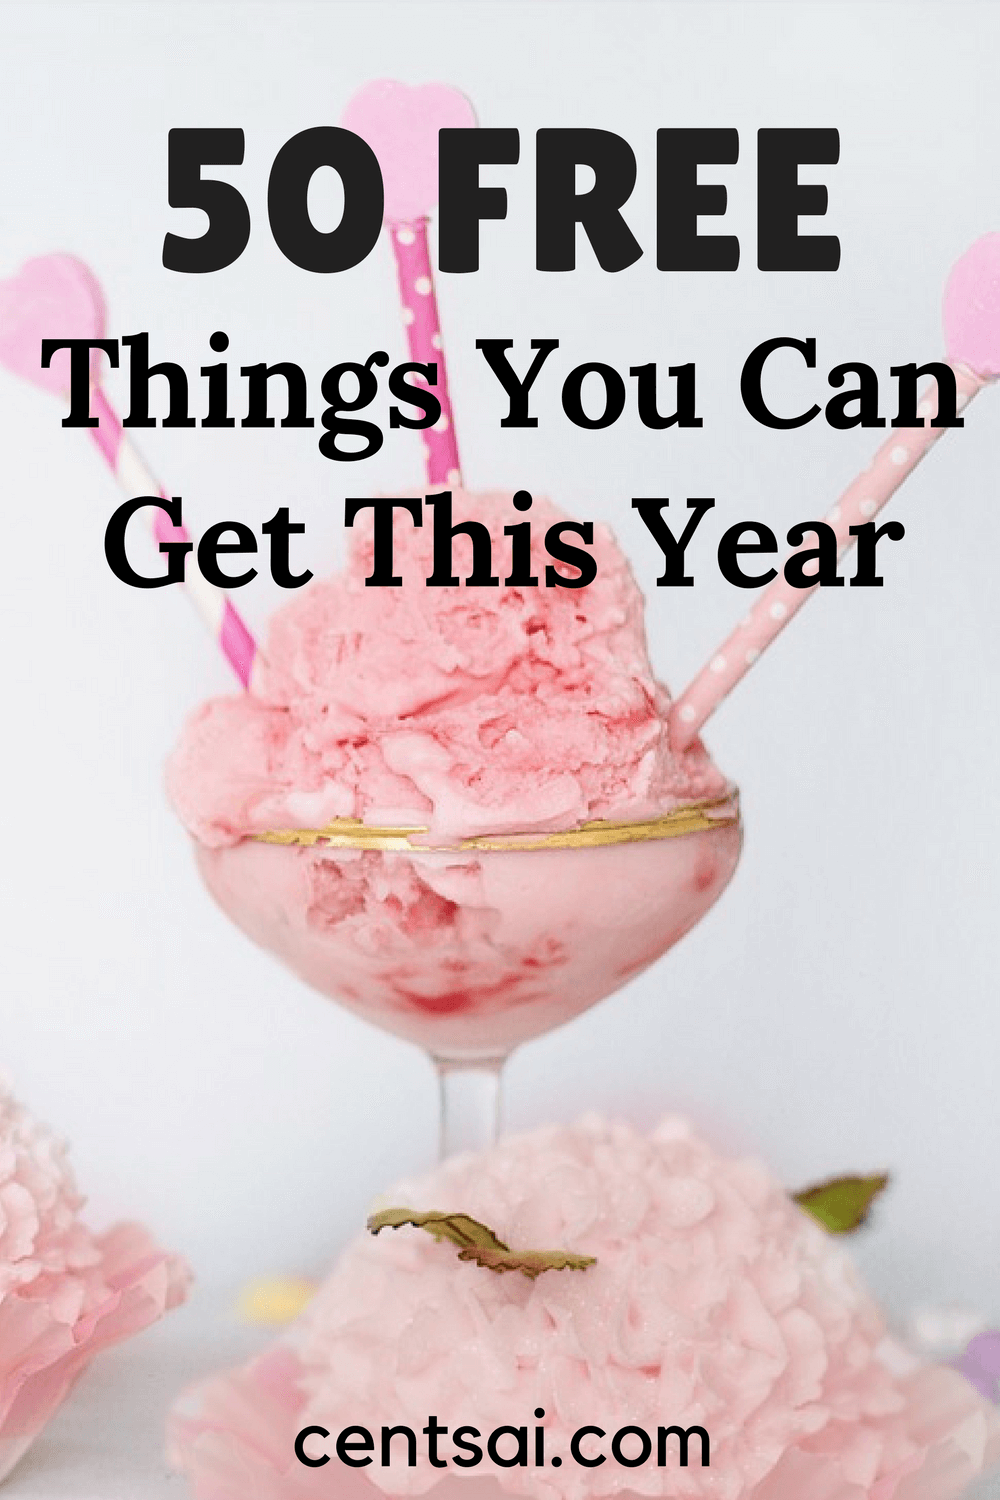 50 Free Things You Can Get This Year